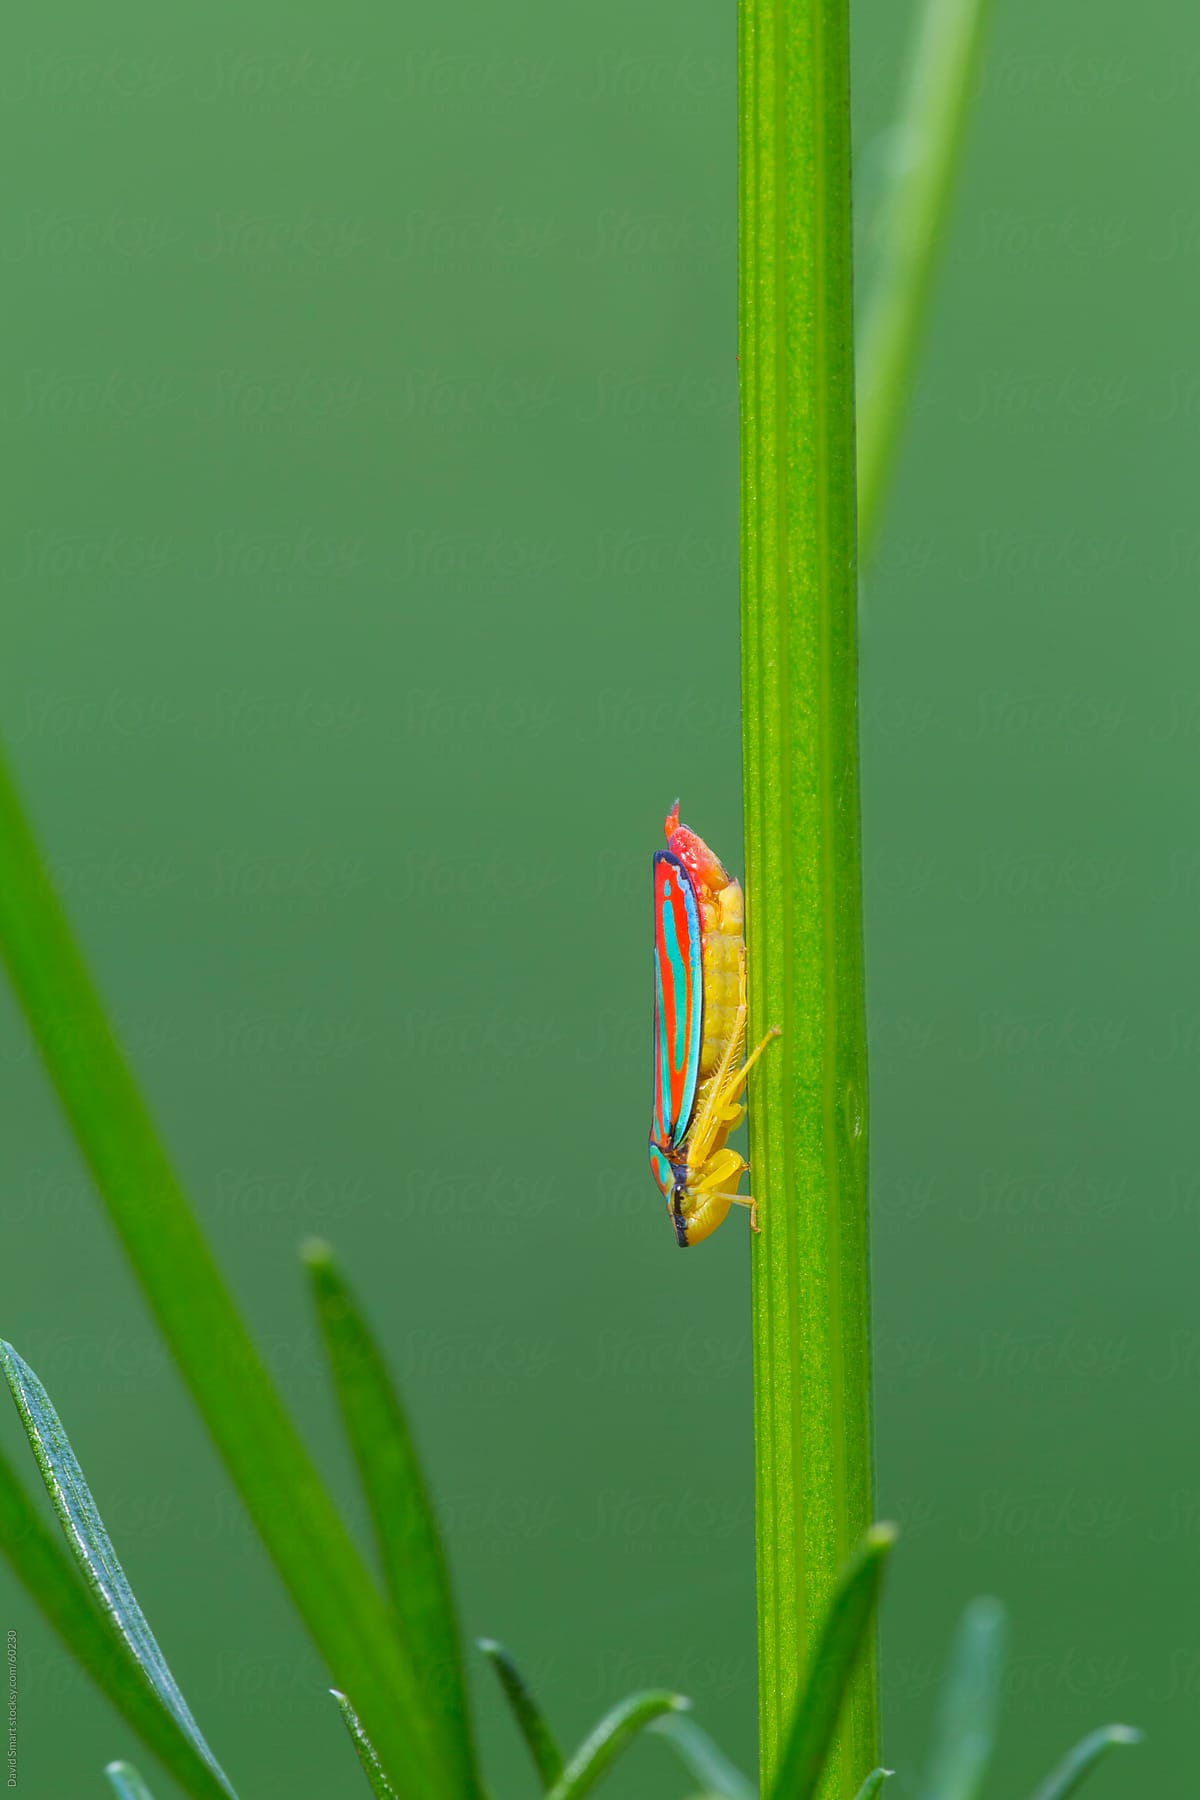 Colorful red-banded leafhopper on a green plant stem